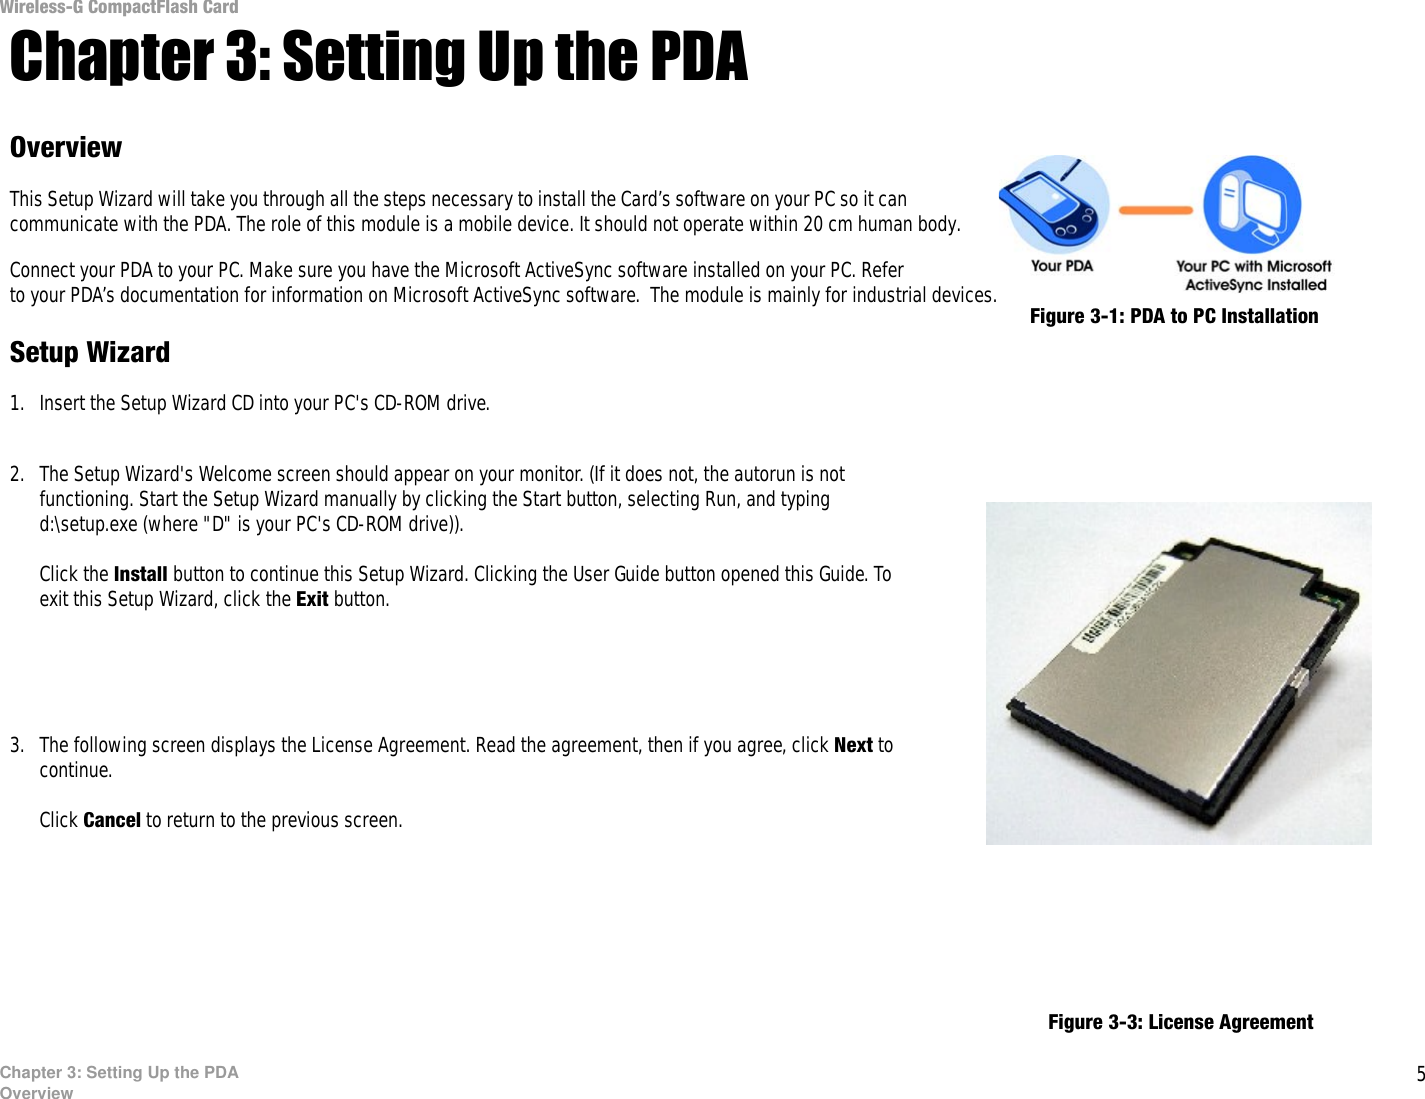 5Chapter 3: Setting Up the PDAOverviewWireless-G CompactFlash CardChapter 3: Setting Up the PDAOverviewThis Setup Wizard will take you through all the steps necessary to install the Card’s software on your PC so it can communicate with the PDA. The role of this module is a mobile device. It should not operate within 20 cm human body.Connect your PDA to your PC. Make sure you have the Microsoft ActiveSync software installed on your PC. Refer to your PDA’s documentation for information on Microsoft ActiveSync software.  The module is mainly for industrial devices. Setup Wizard1. Insert the Setup Wizard CD into your PC&apos;s CD-ROM drive. 2. The Setup Wizard&apos;s Welcome screen should appear on your monitor. (If it does not, the autorun is not functioning. Start the Setup Wizard manually by clicking the Start button, selecting Run, and typing d:\setup.exe (where &quot;D&quot; is your PC&apos;s CD-ROM drive)). Click the Install button to continue this Setup Wizard. Clicking the User Guide button opened this Guide. To exit this Setup Wizard, click the Exit button.3. The following screen displays the License Agreement. Read the agreement, then if you agree, click Next to continue. Click Cancel to return to the previous screen. Figure 3-3: License AgreementFigure 3-1: PDA to PC InstallationFigure 3-2: Welcome